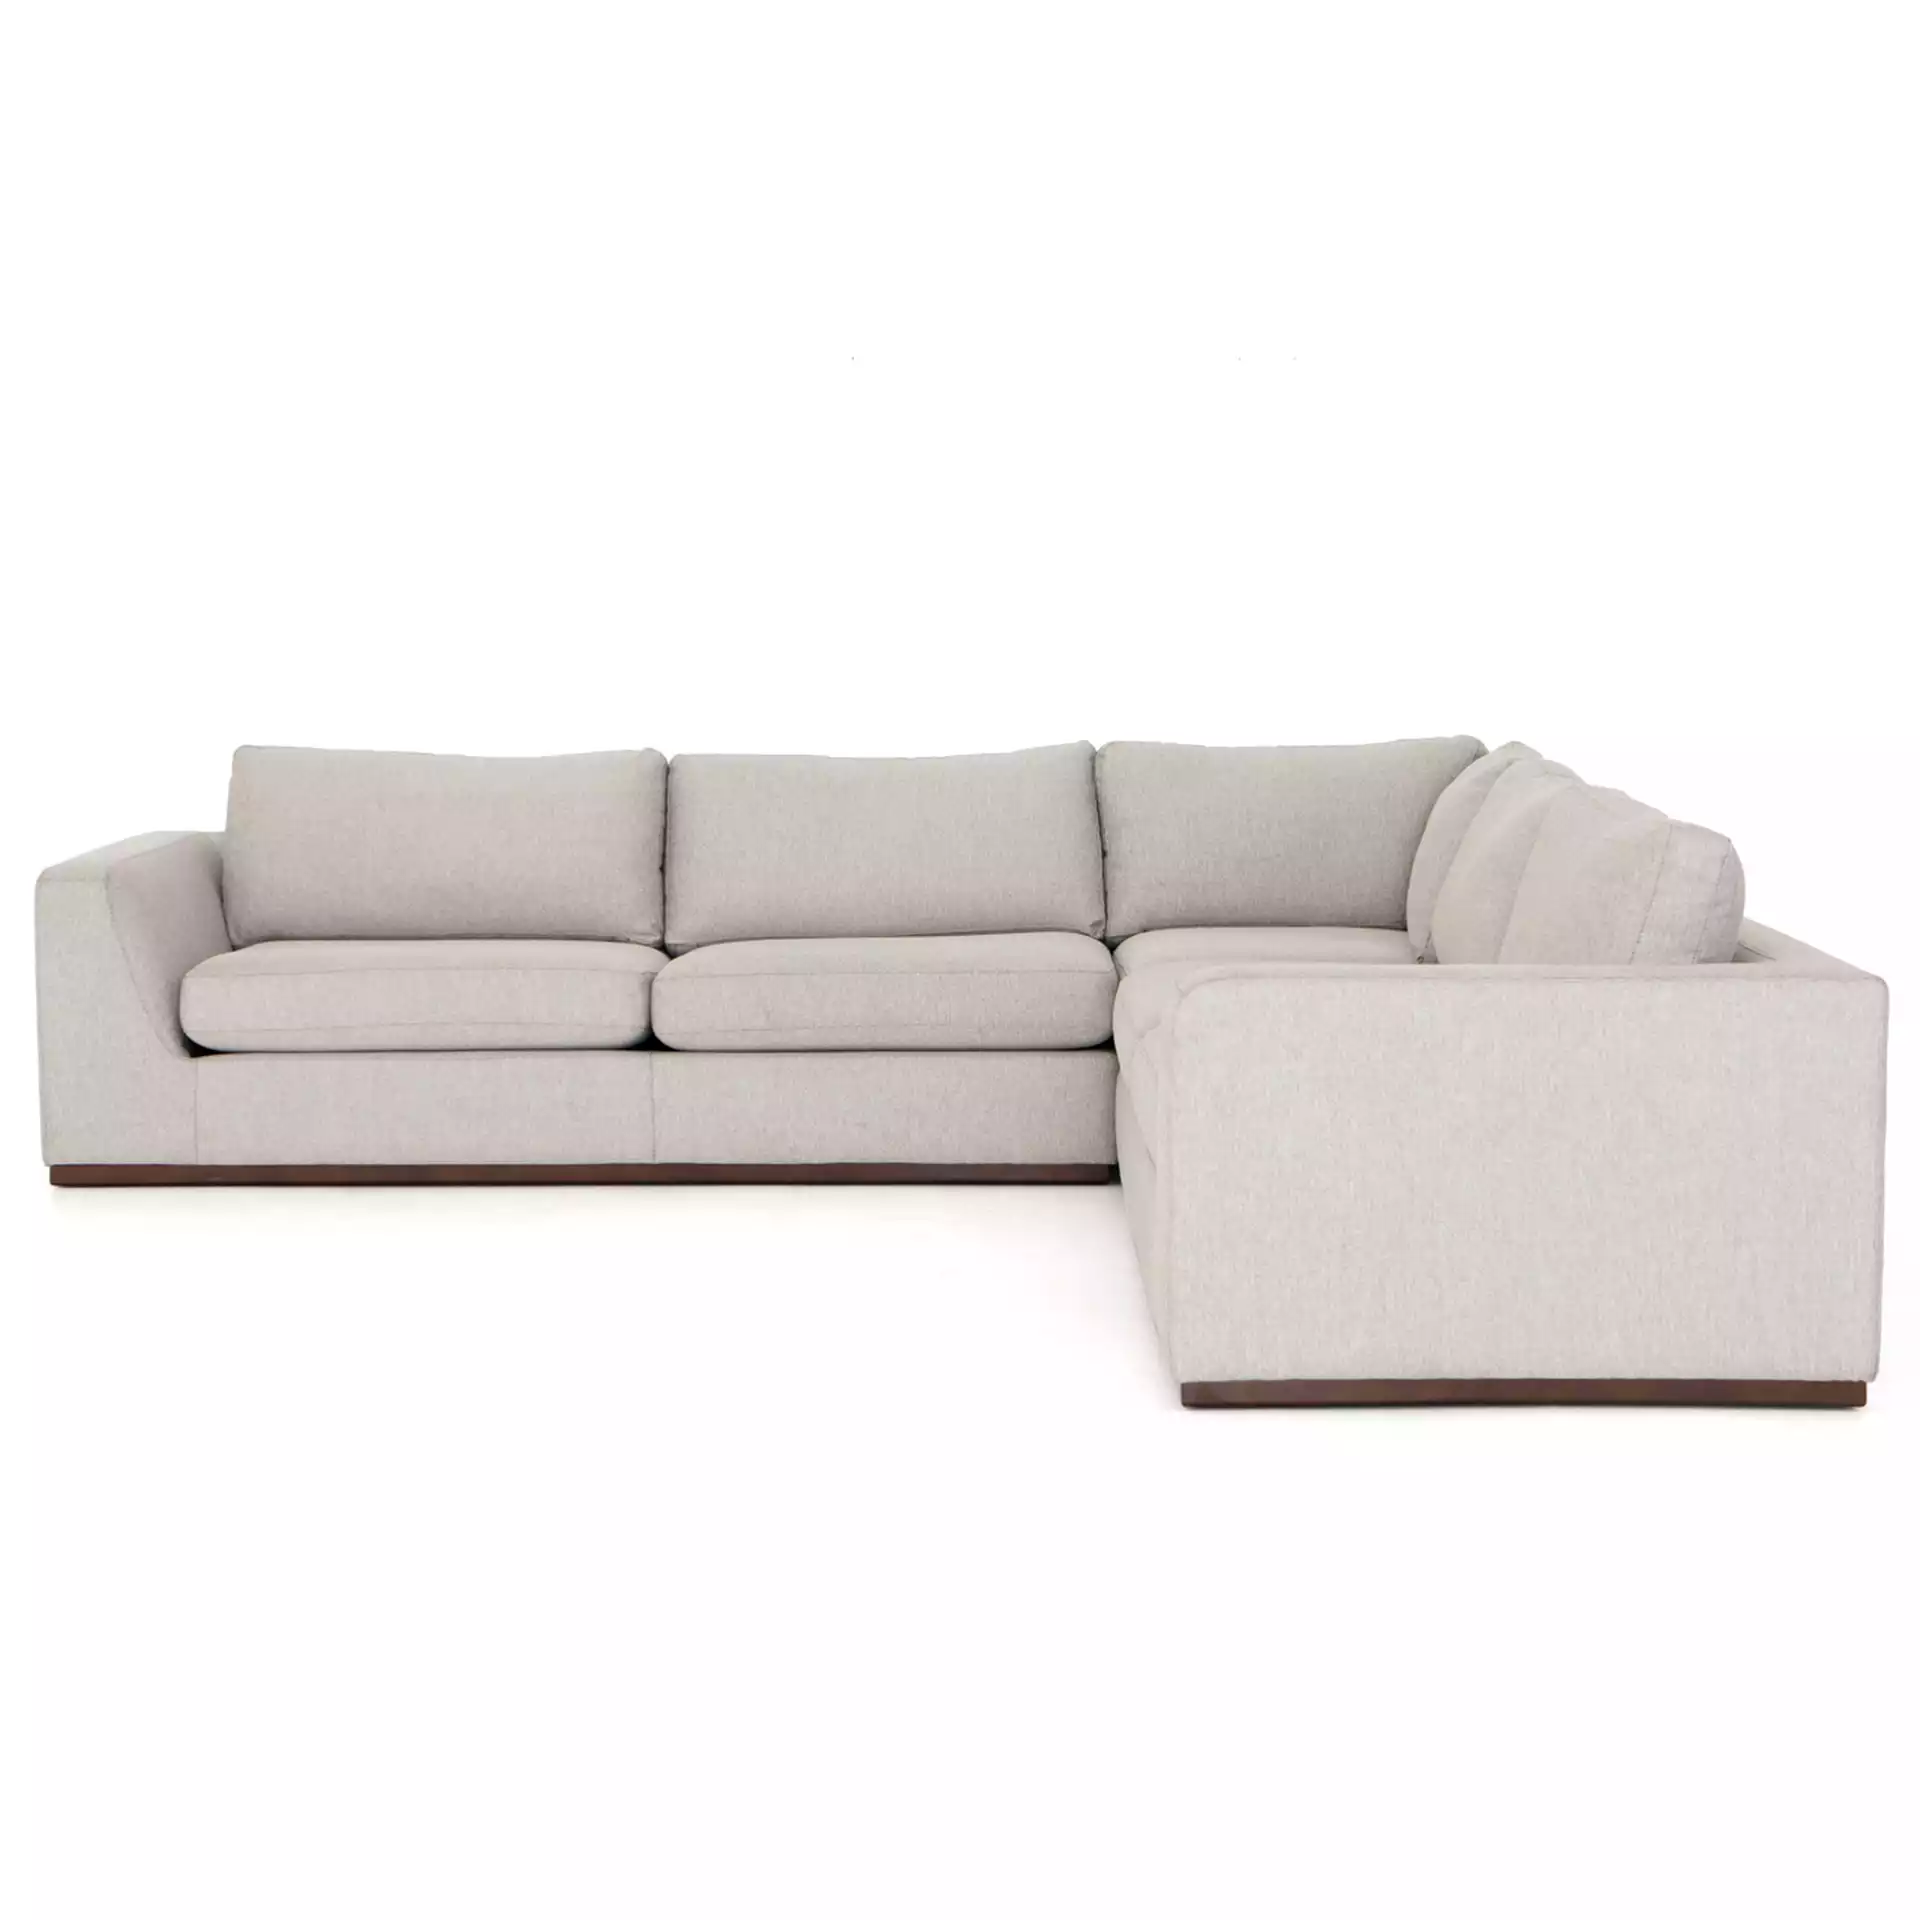 Stanley Modern Classic Light Grey Upholstered 3 Piece Sectional Sofa